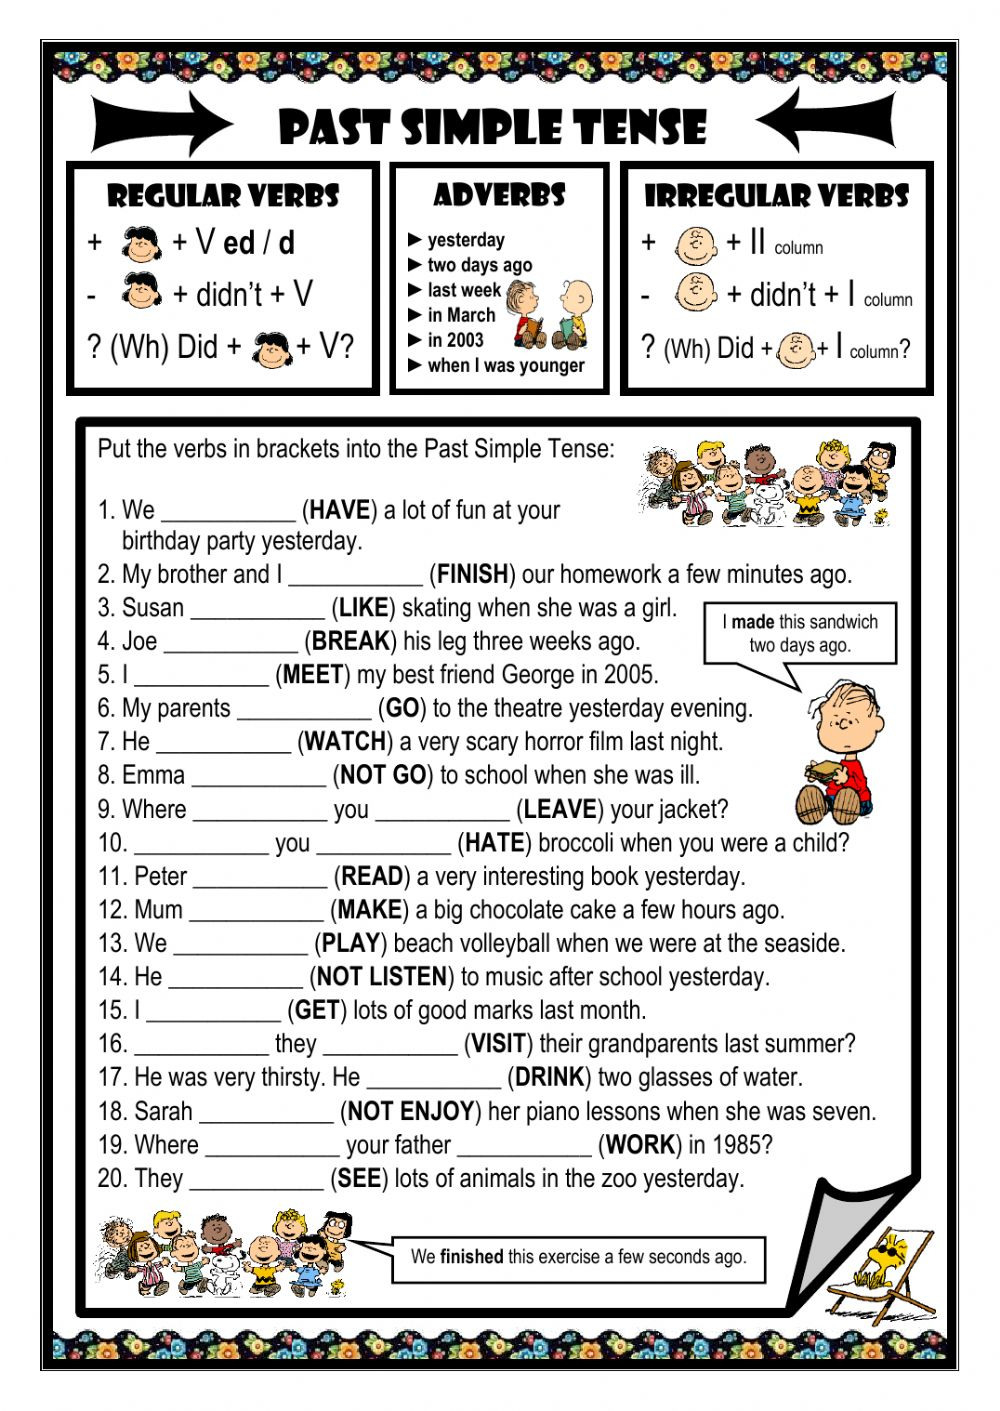 printable-worksheets-for-simple-past-tense-englishgrammarsoft